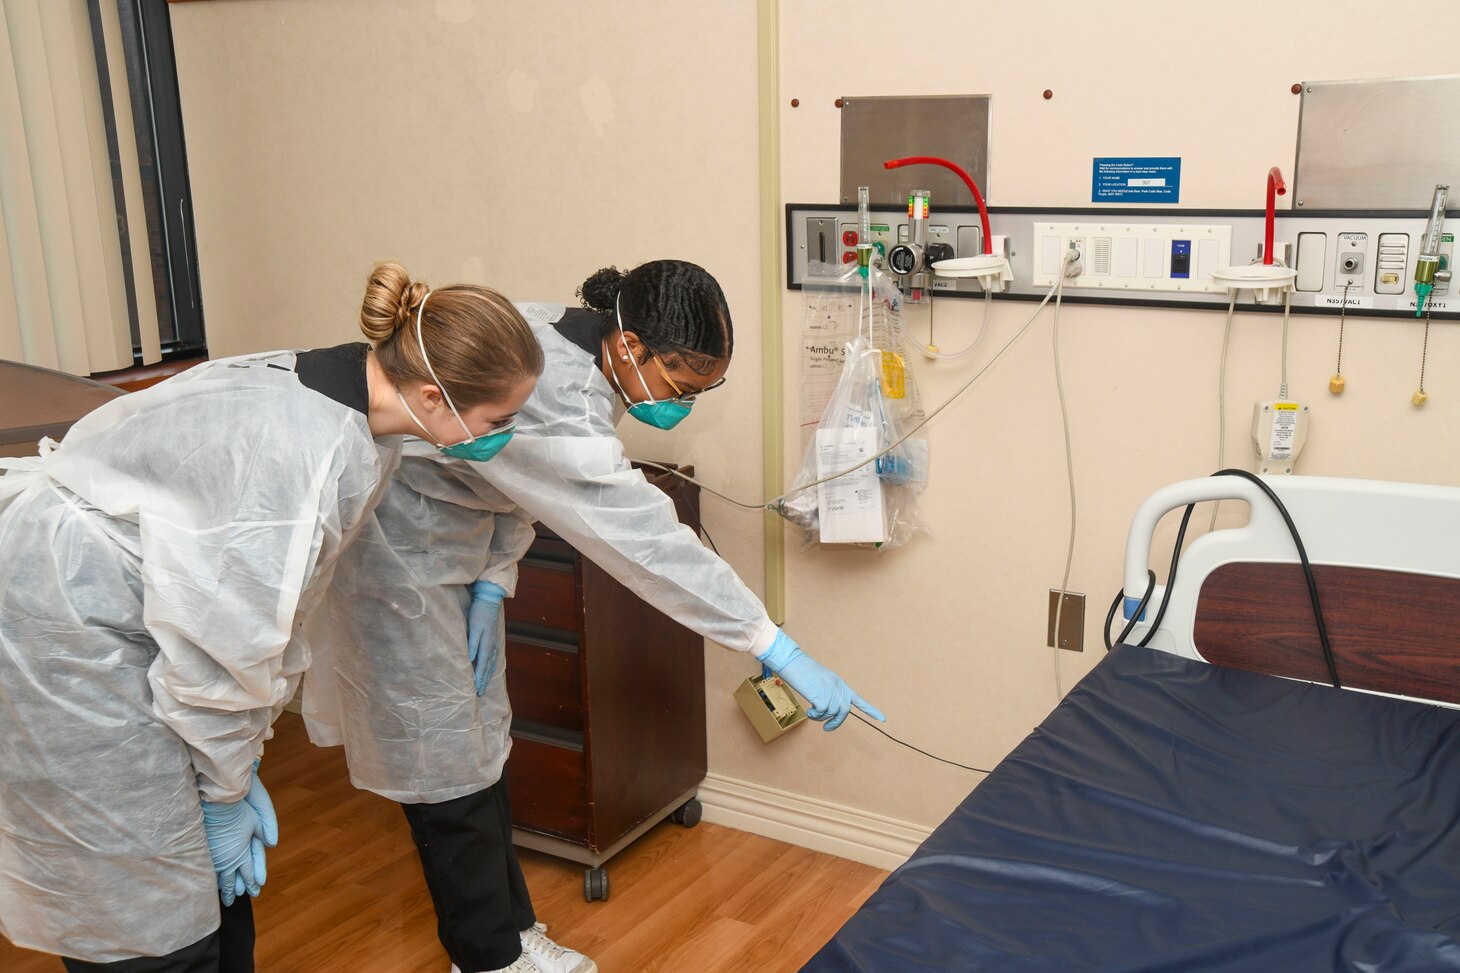 Lejeune High School students Katherine Scott (left) and McKenzie Pankey learn about medical equipment in the multi-service ward of Naval Medical Center Camp Lejeune on March 5, 2024. Scott and Pankey are enrolled in the high school’s Health Sciences/Nurse Aide I Program led by Dr. Angelia Washington, a nurse educator and founder of the program.